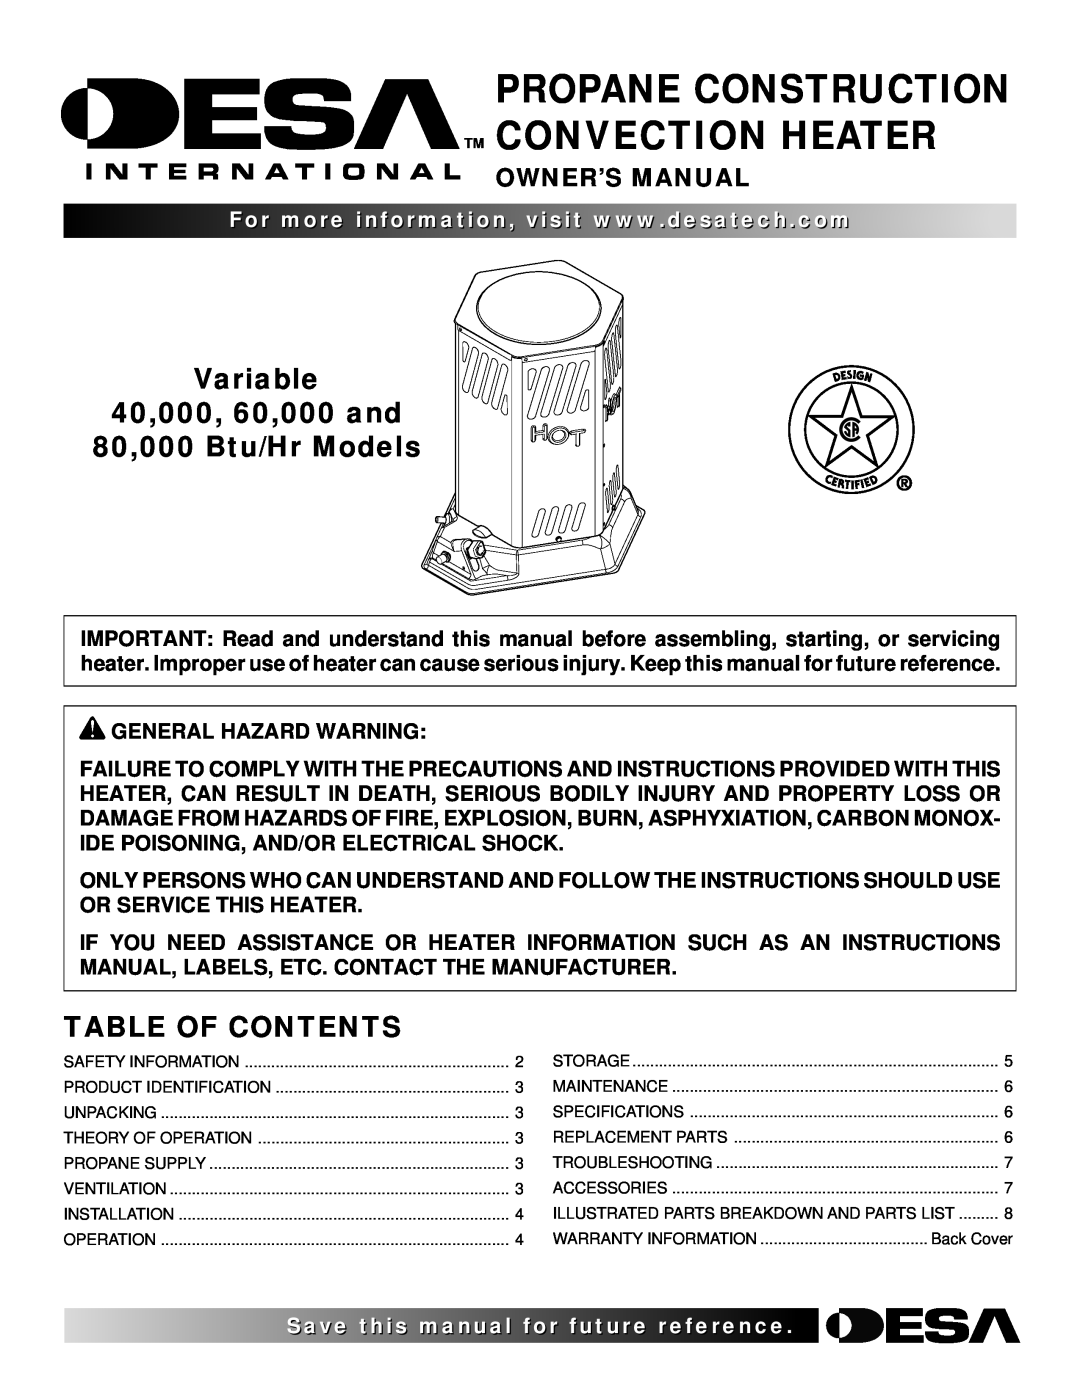 Desa owner manual Variable 40,000, 60,000 and 80,000 Btu/Hr Models, Table Of Contents, Save this manual for future 